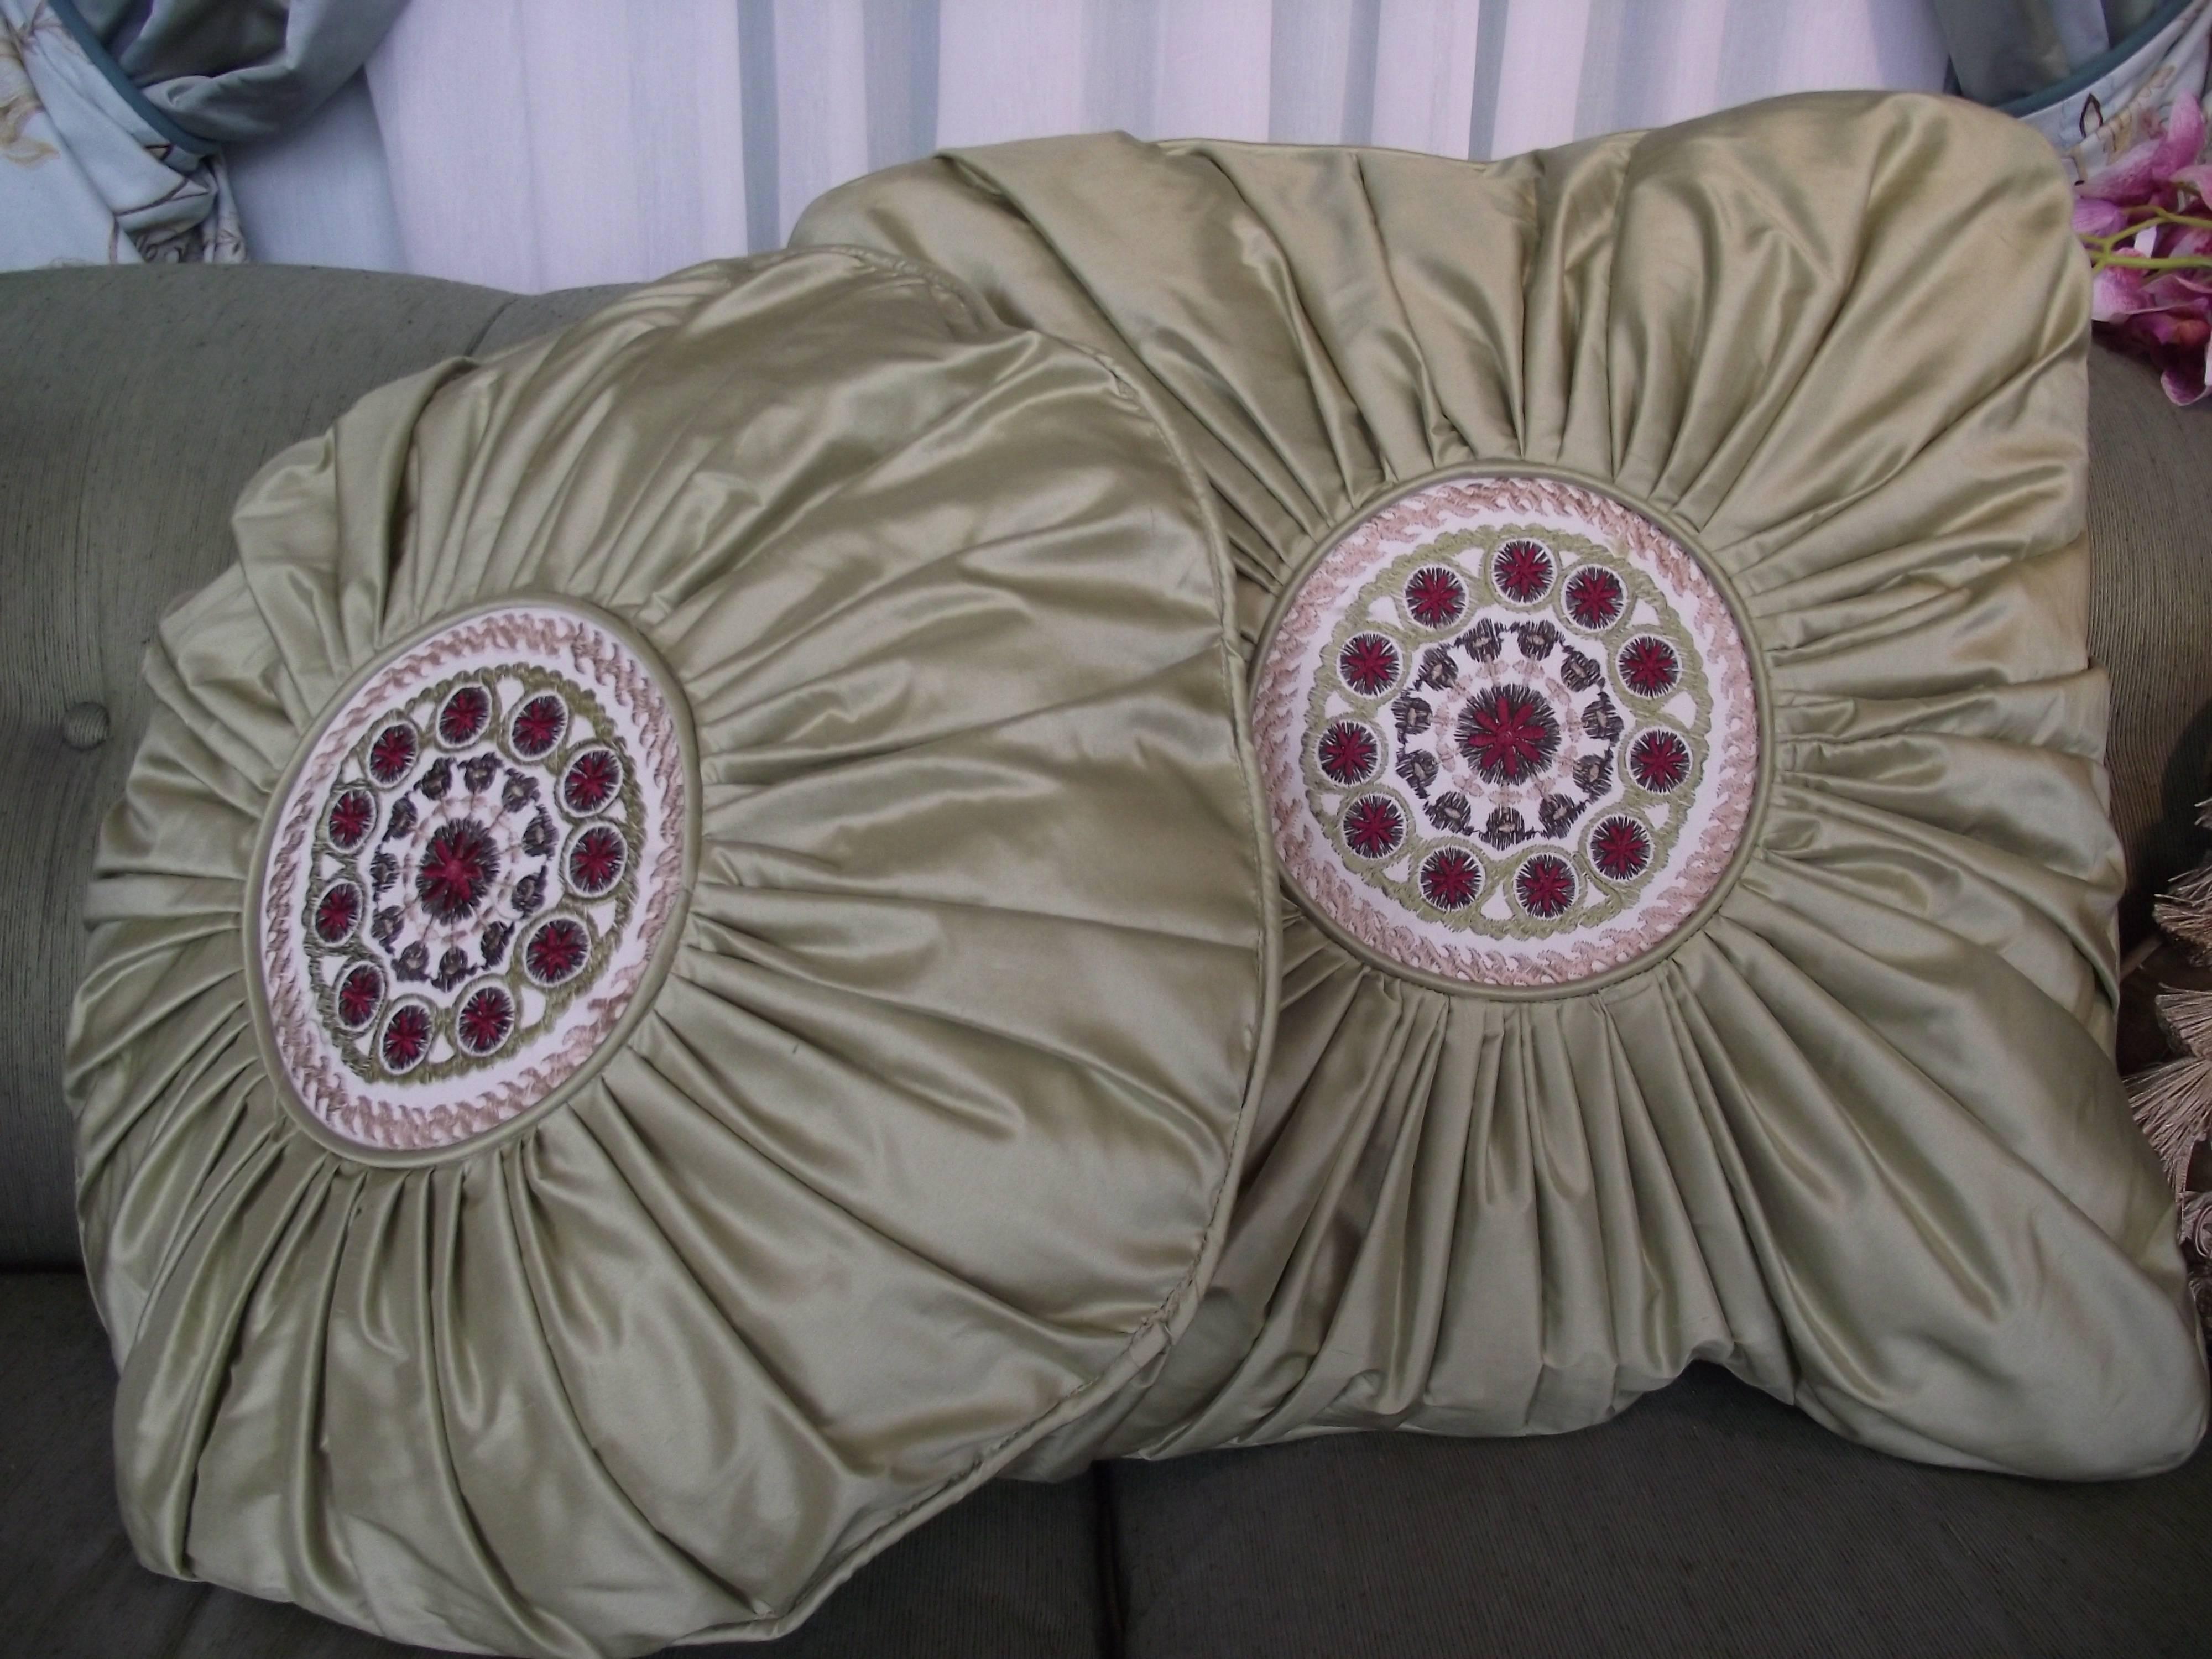  Throw Pillow inPleated Sage (green)  with Embroidered Center Mediallion In Excellent Condition For Sale In Harrisburg, PA